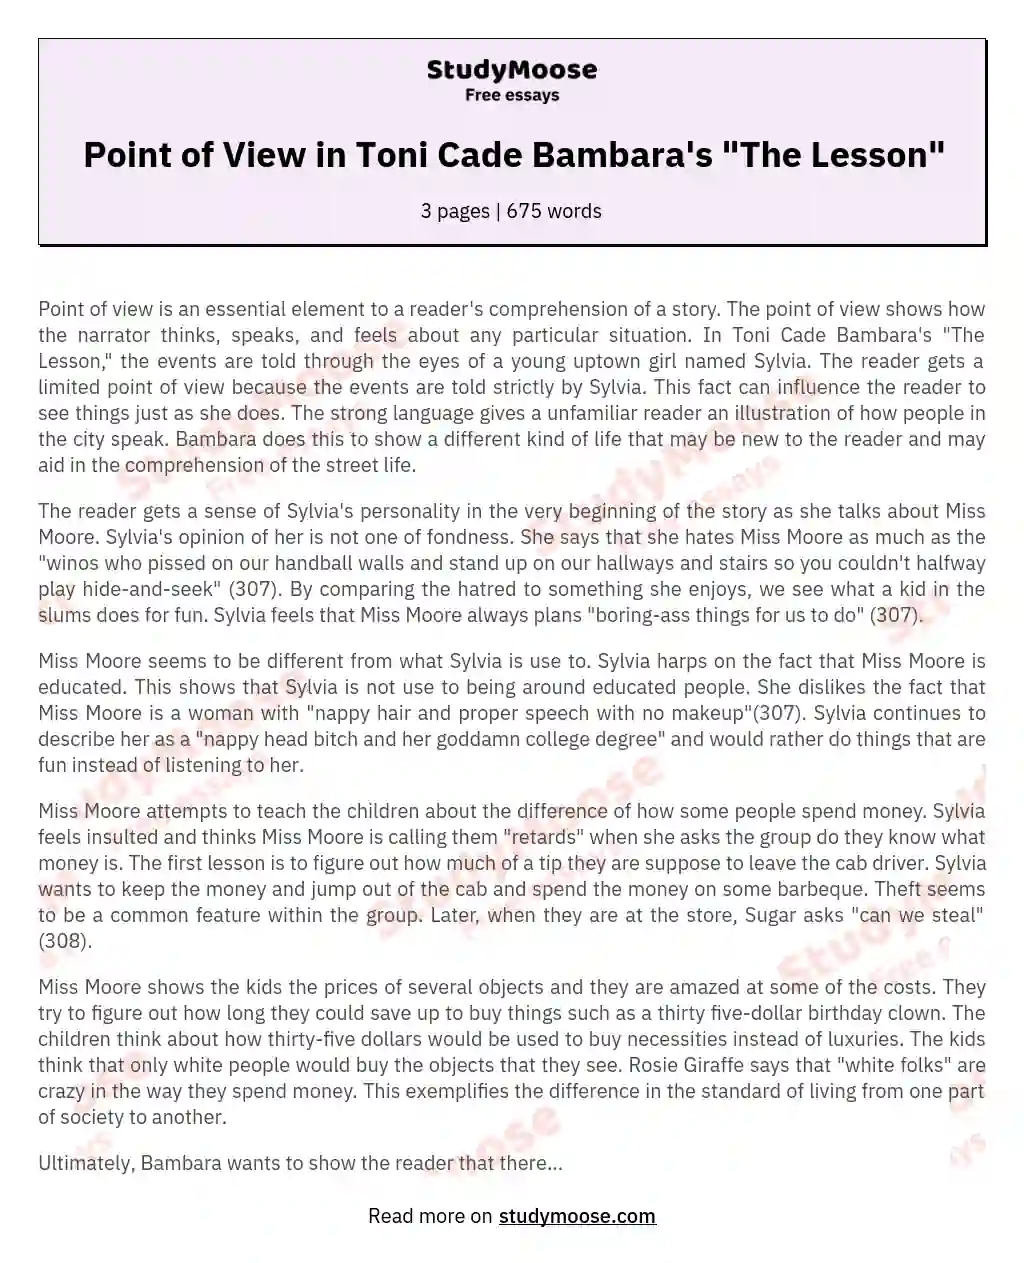 Point of View in Toni Cade Bambara's "The Lesson"